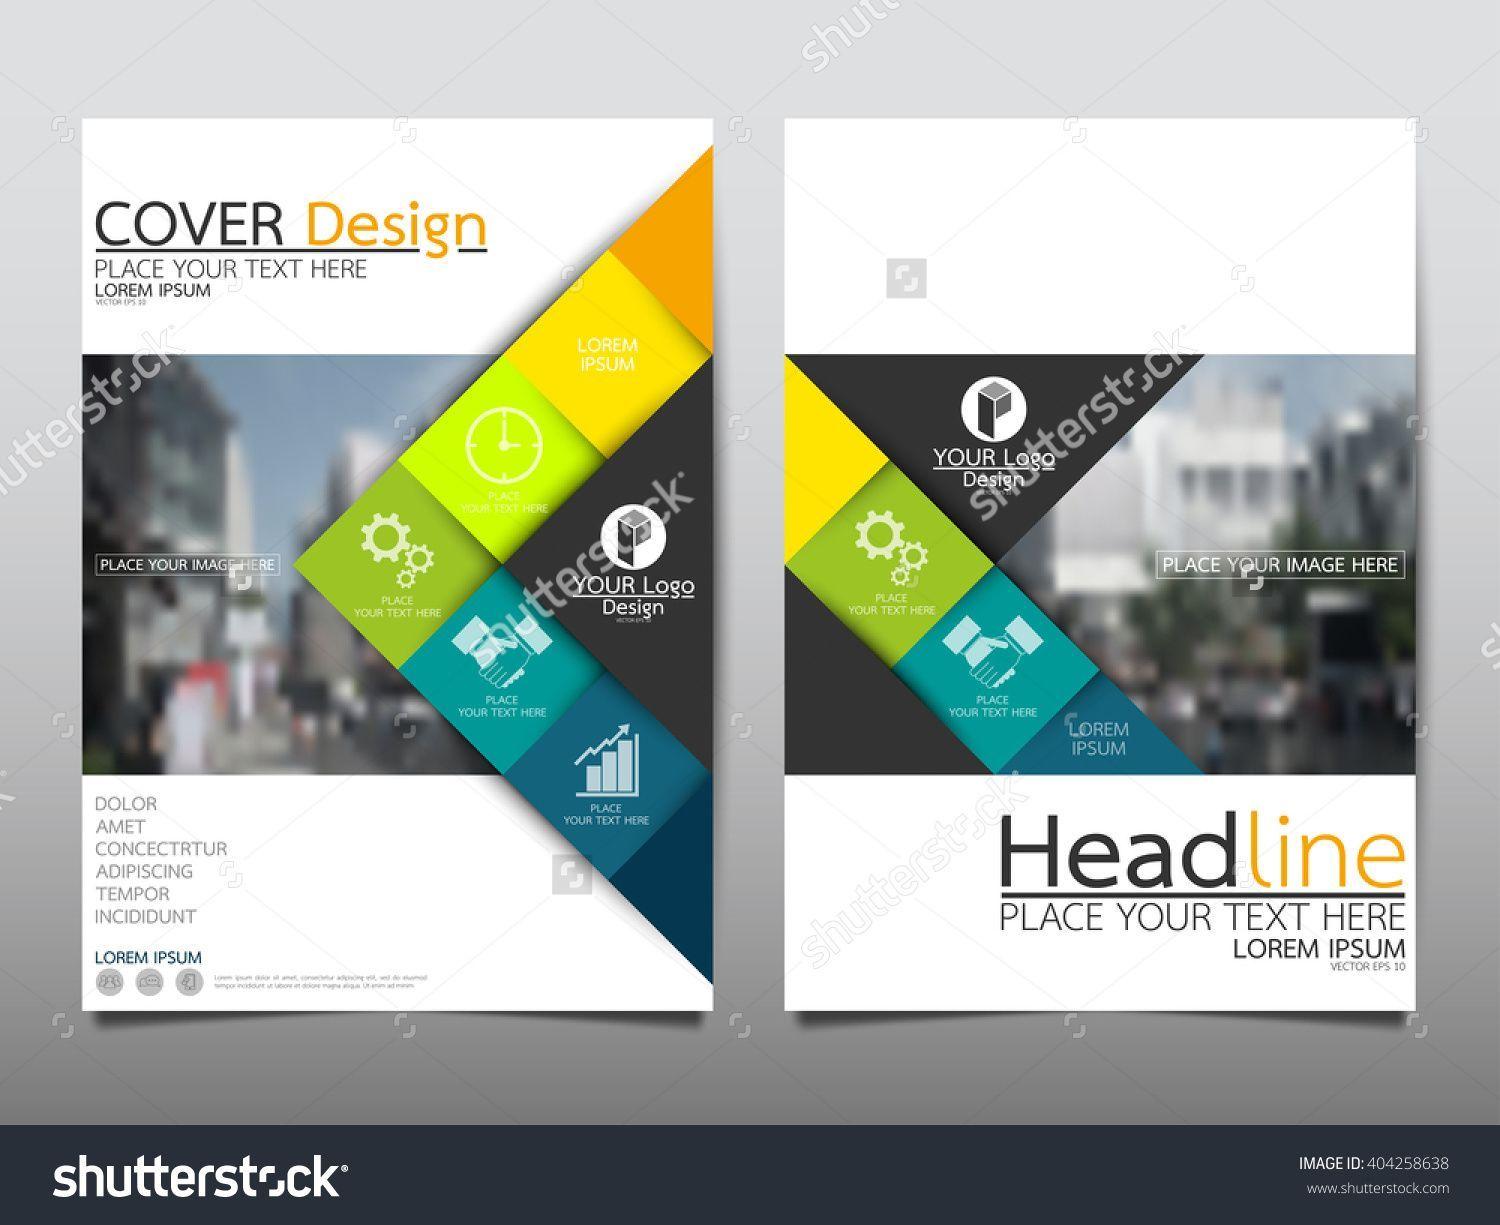 Yellow Background Blue Square Logo - Yellow And Blue Square Annual Report Brochure Flyer Design Template ...